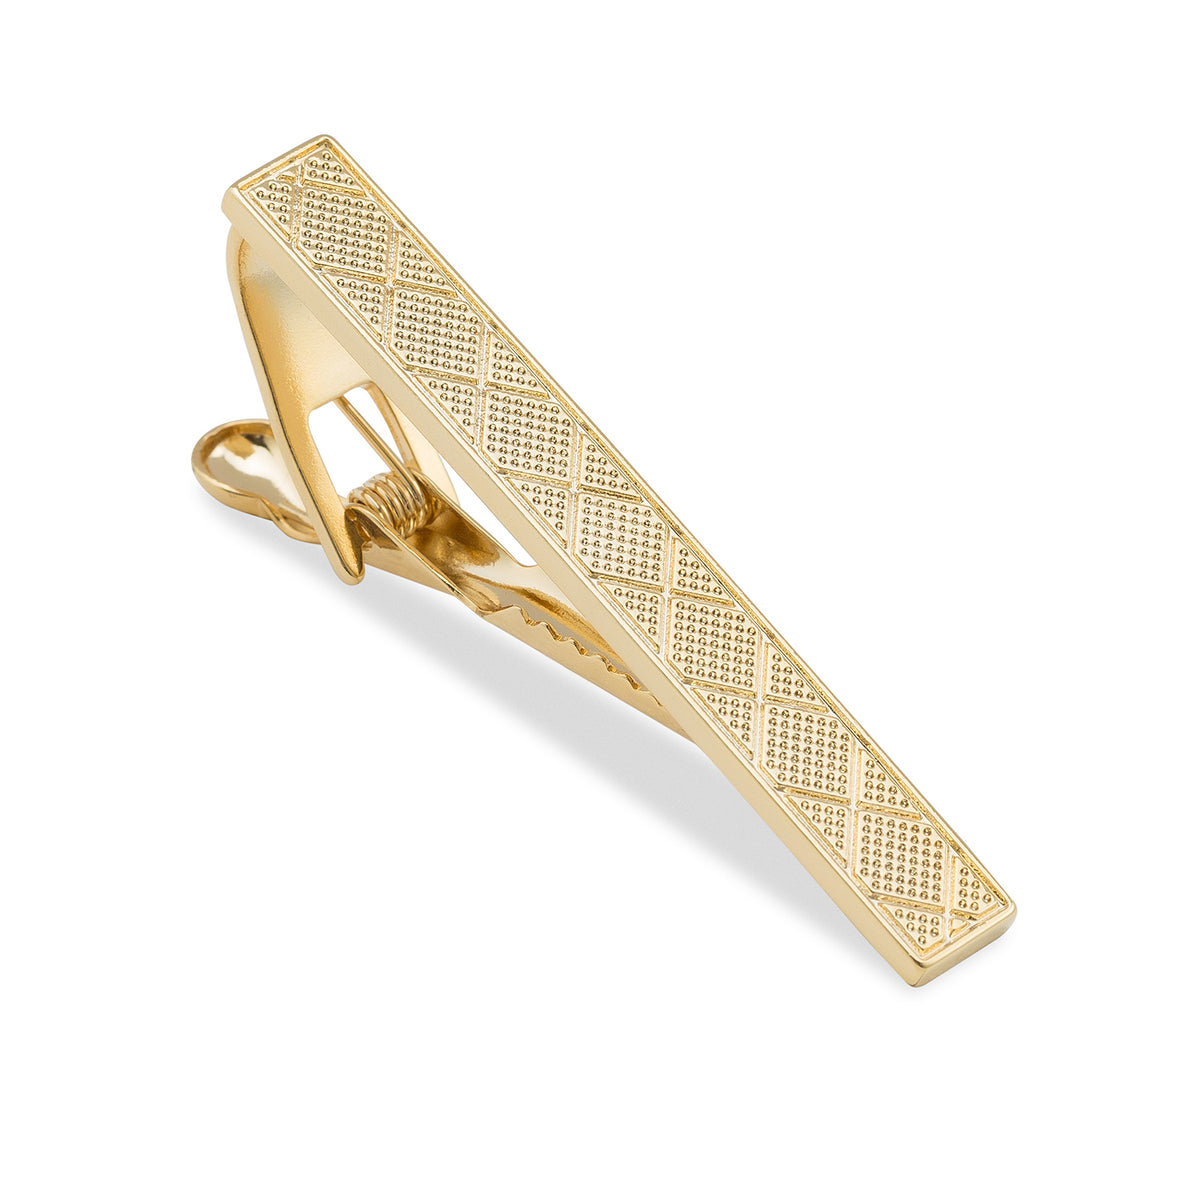 Monte Carlo Gold Tie Bar | Mens Swank Square Dotted Grid Tie Clip Bars ...